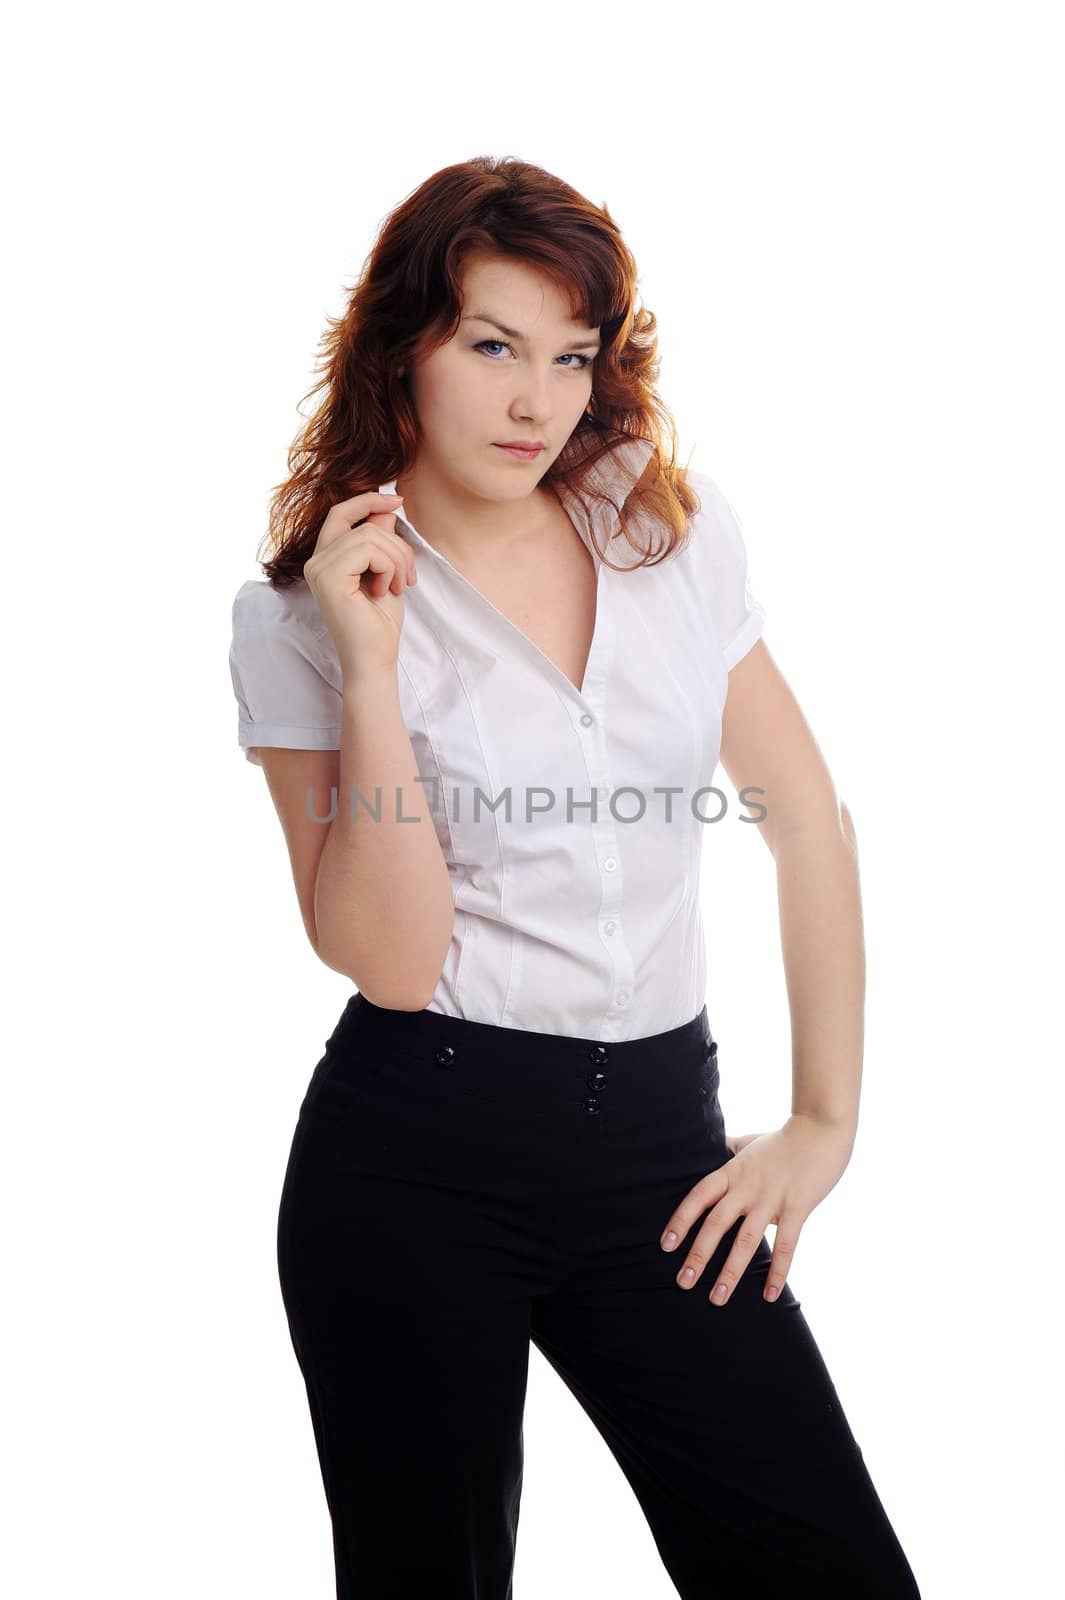 An image of a young beautiful woman in white blouse